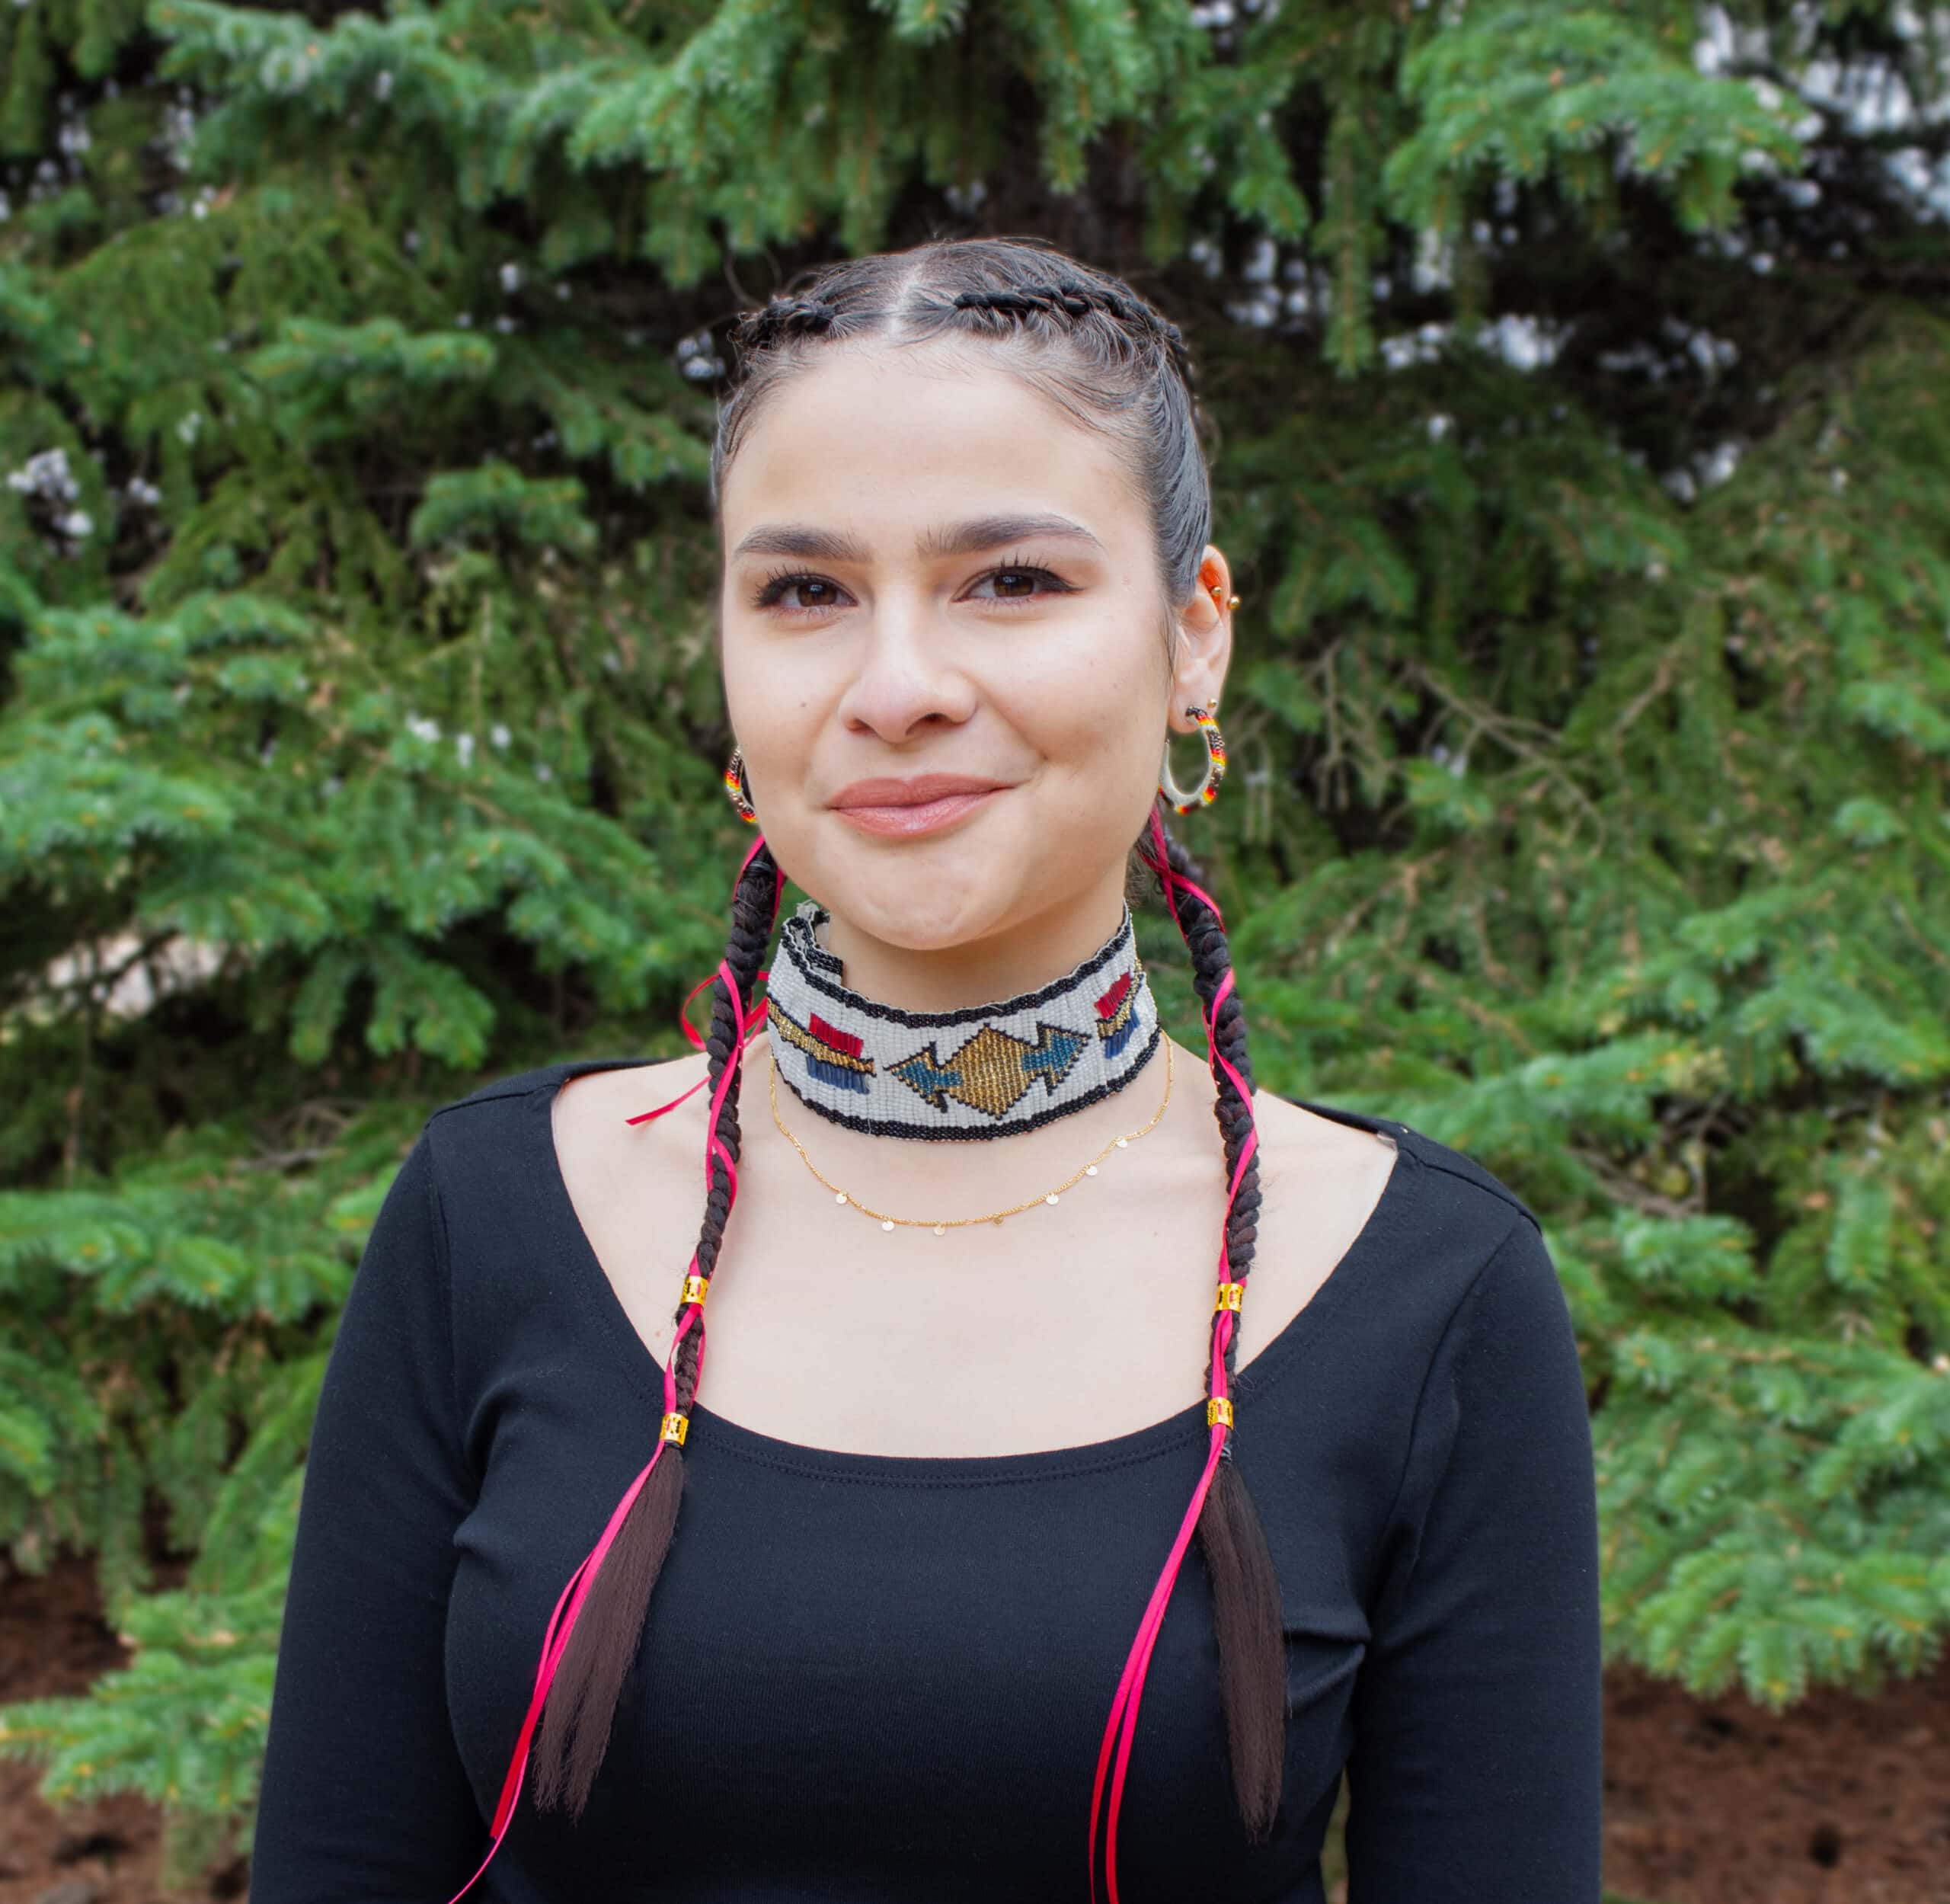 Portrait of Rayna Martens against a background of pine trees. Her hair is braided with red ribbons and she is wearing a beaded choker.